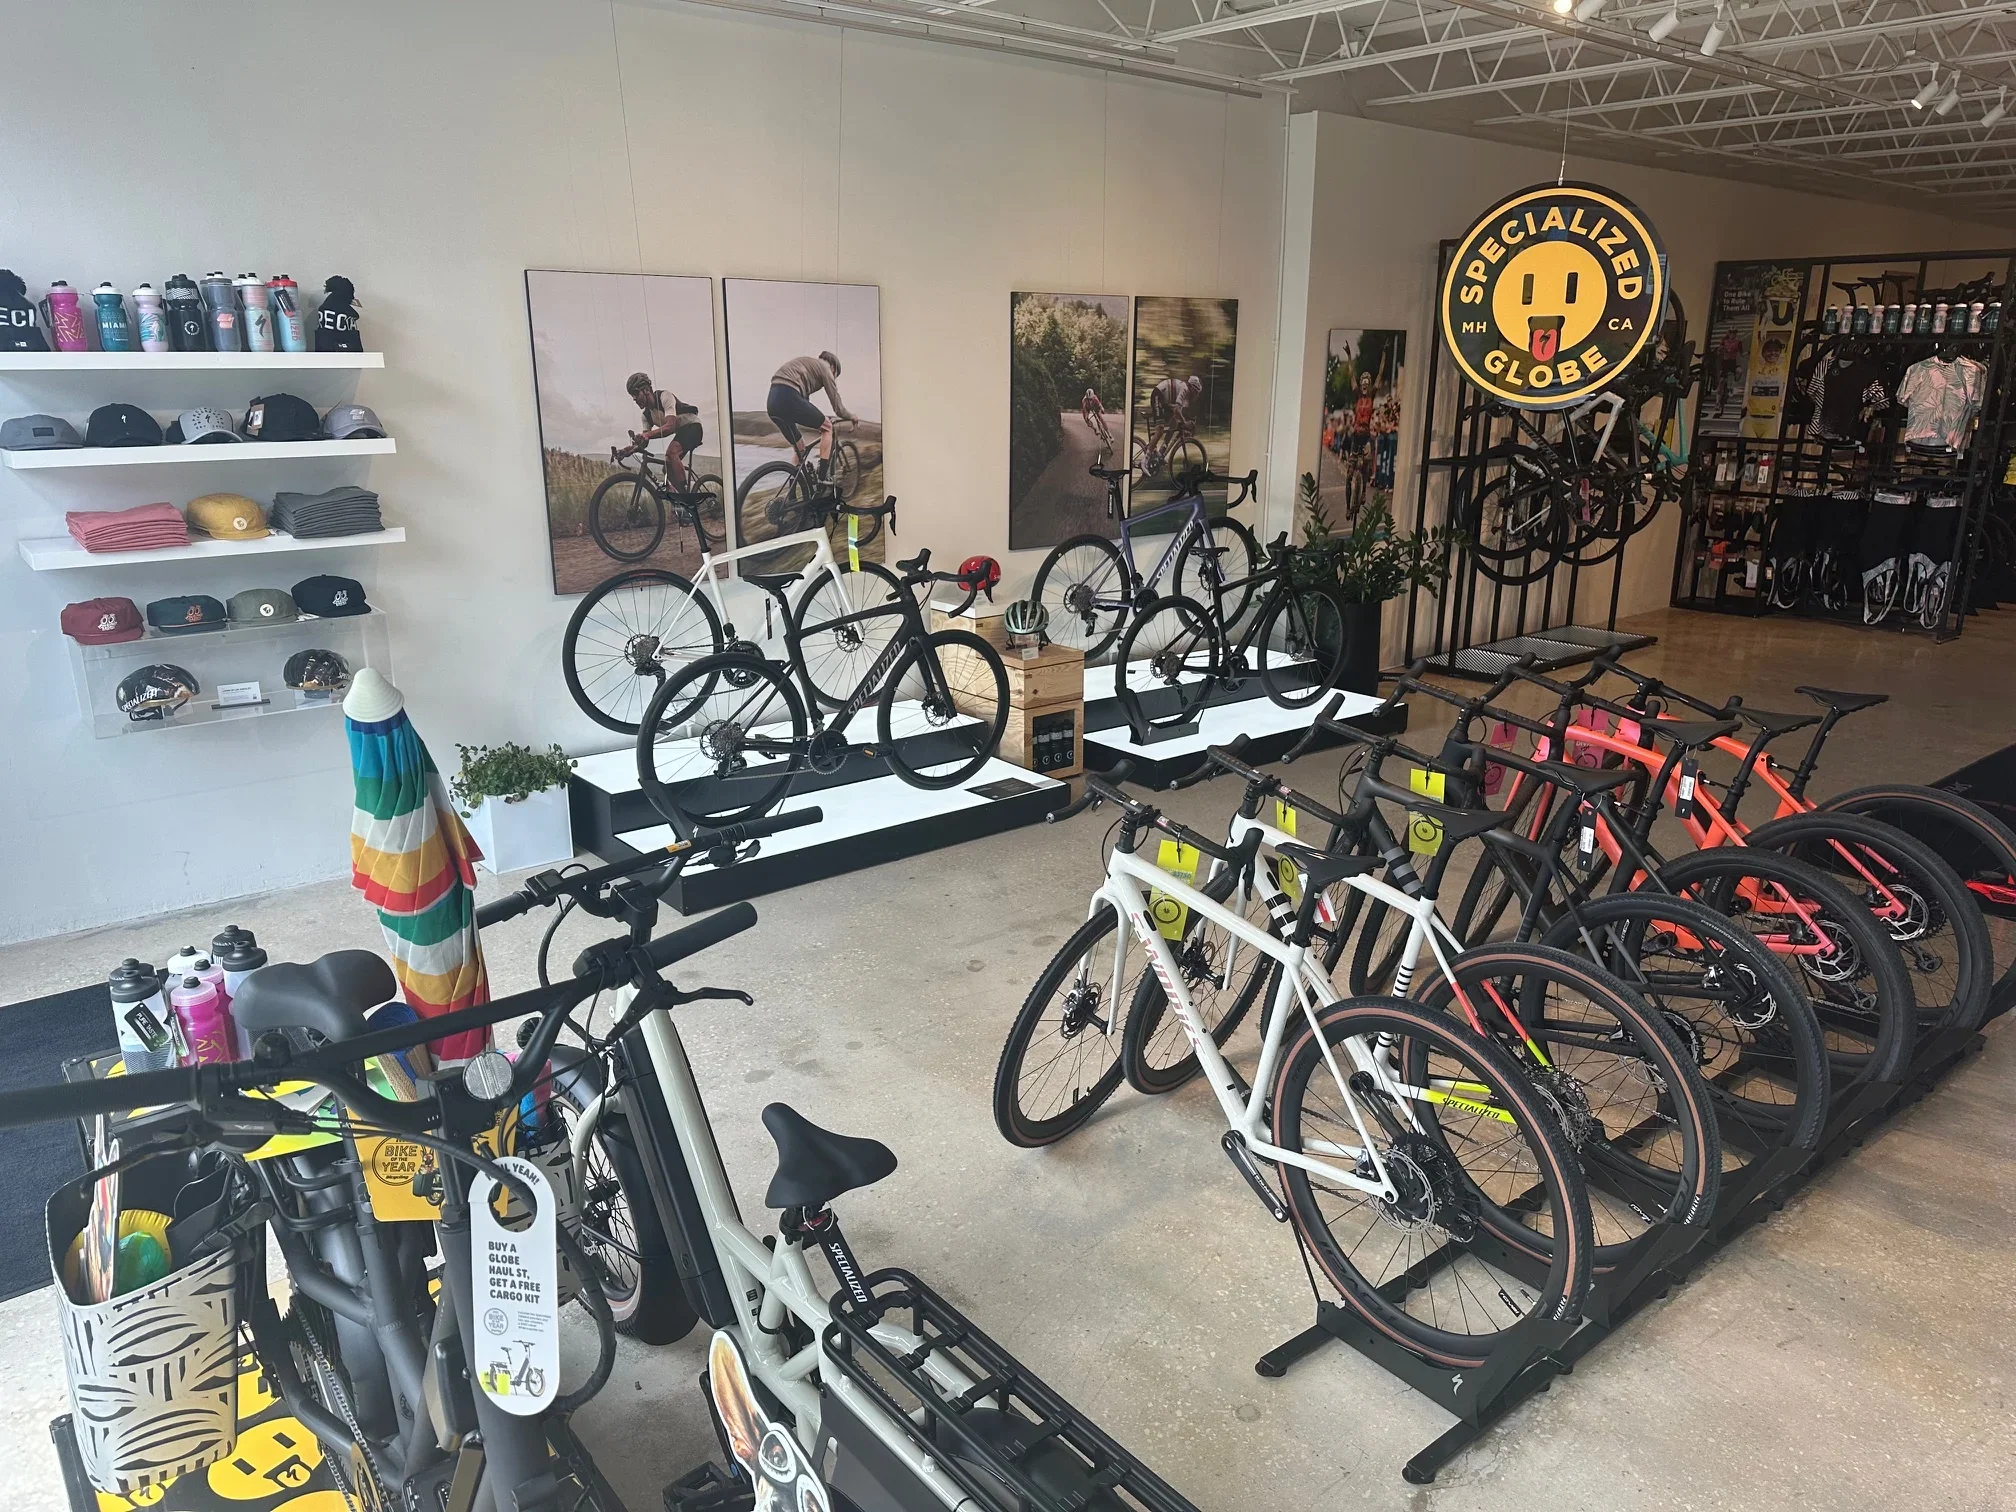 Bicycles and gear on display at Specialized bike shop in Miami, Coconut Grove, FL.